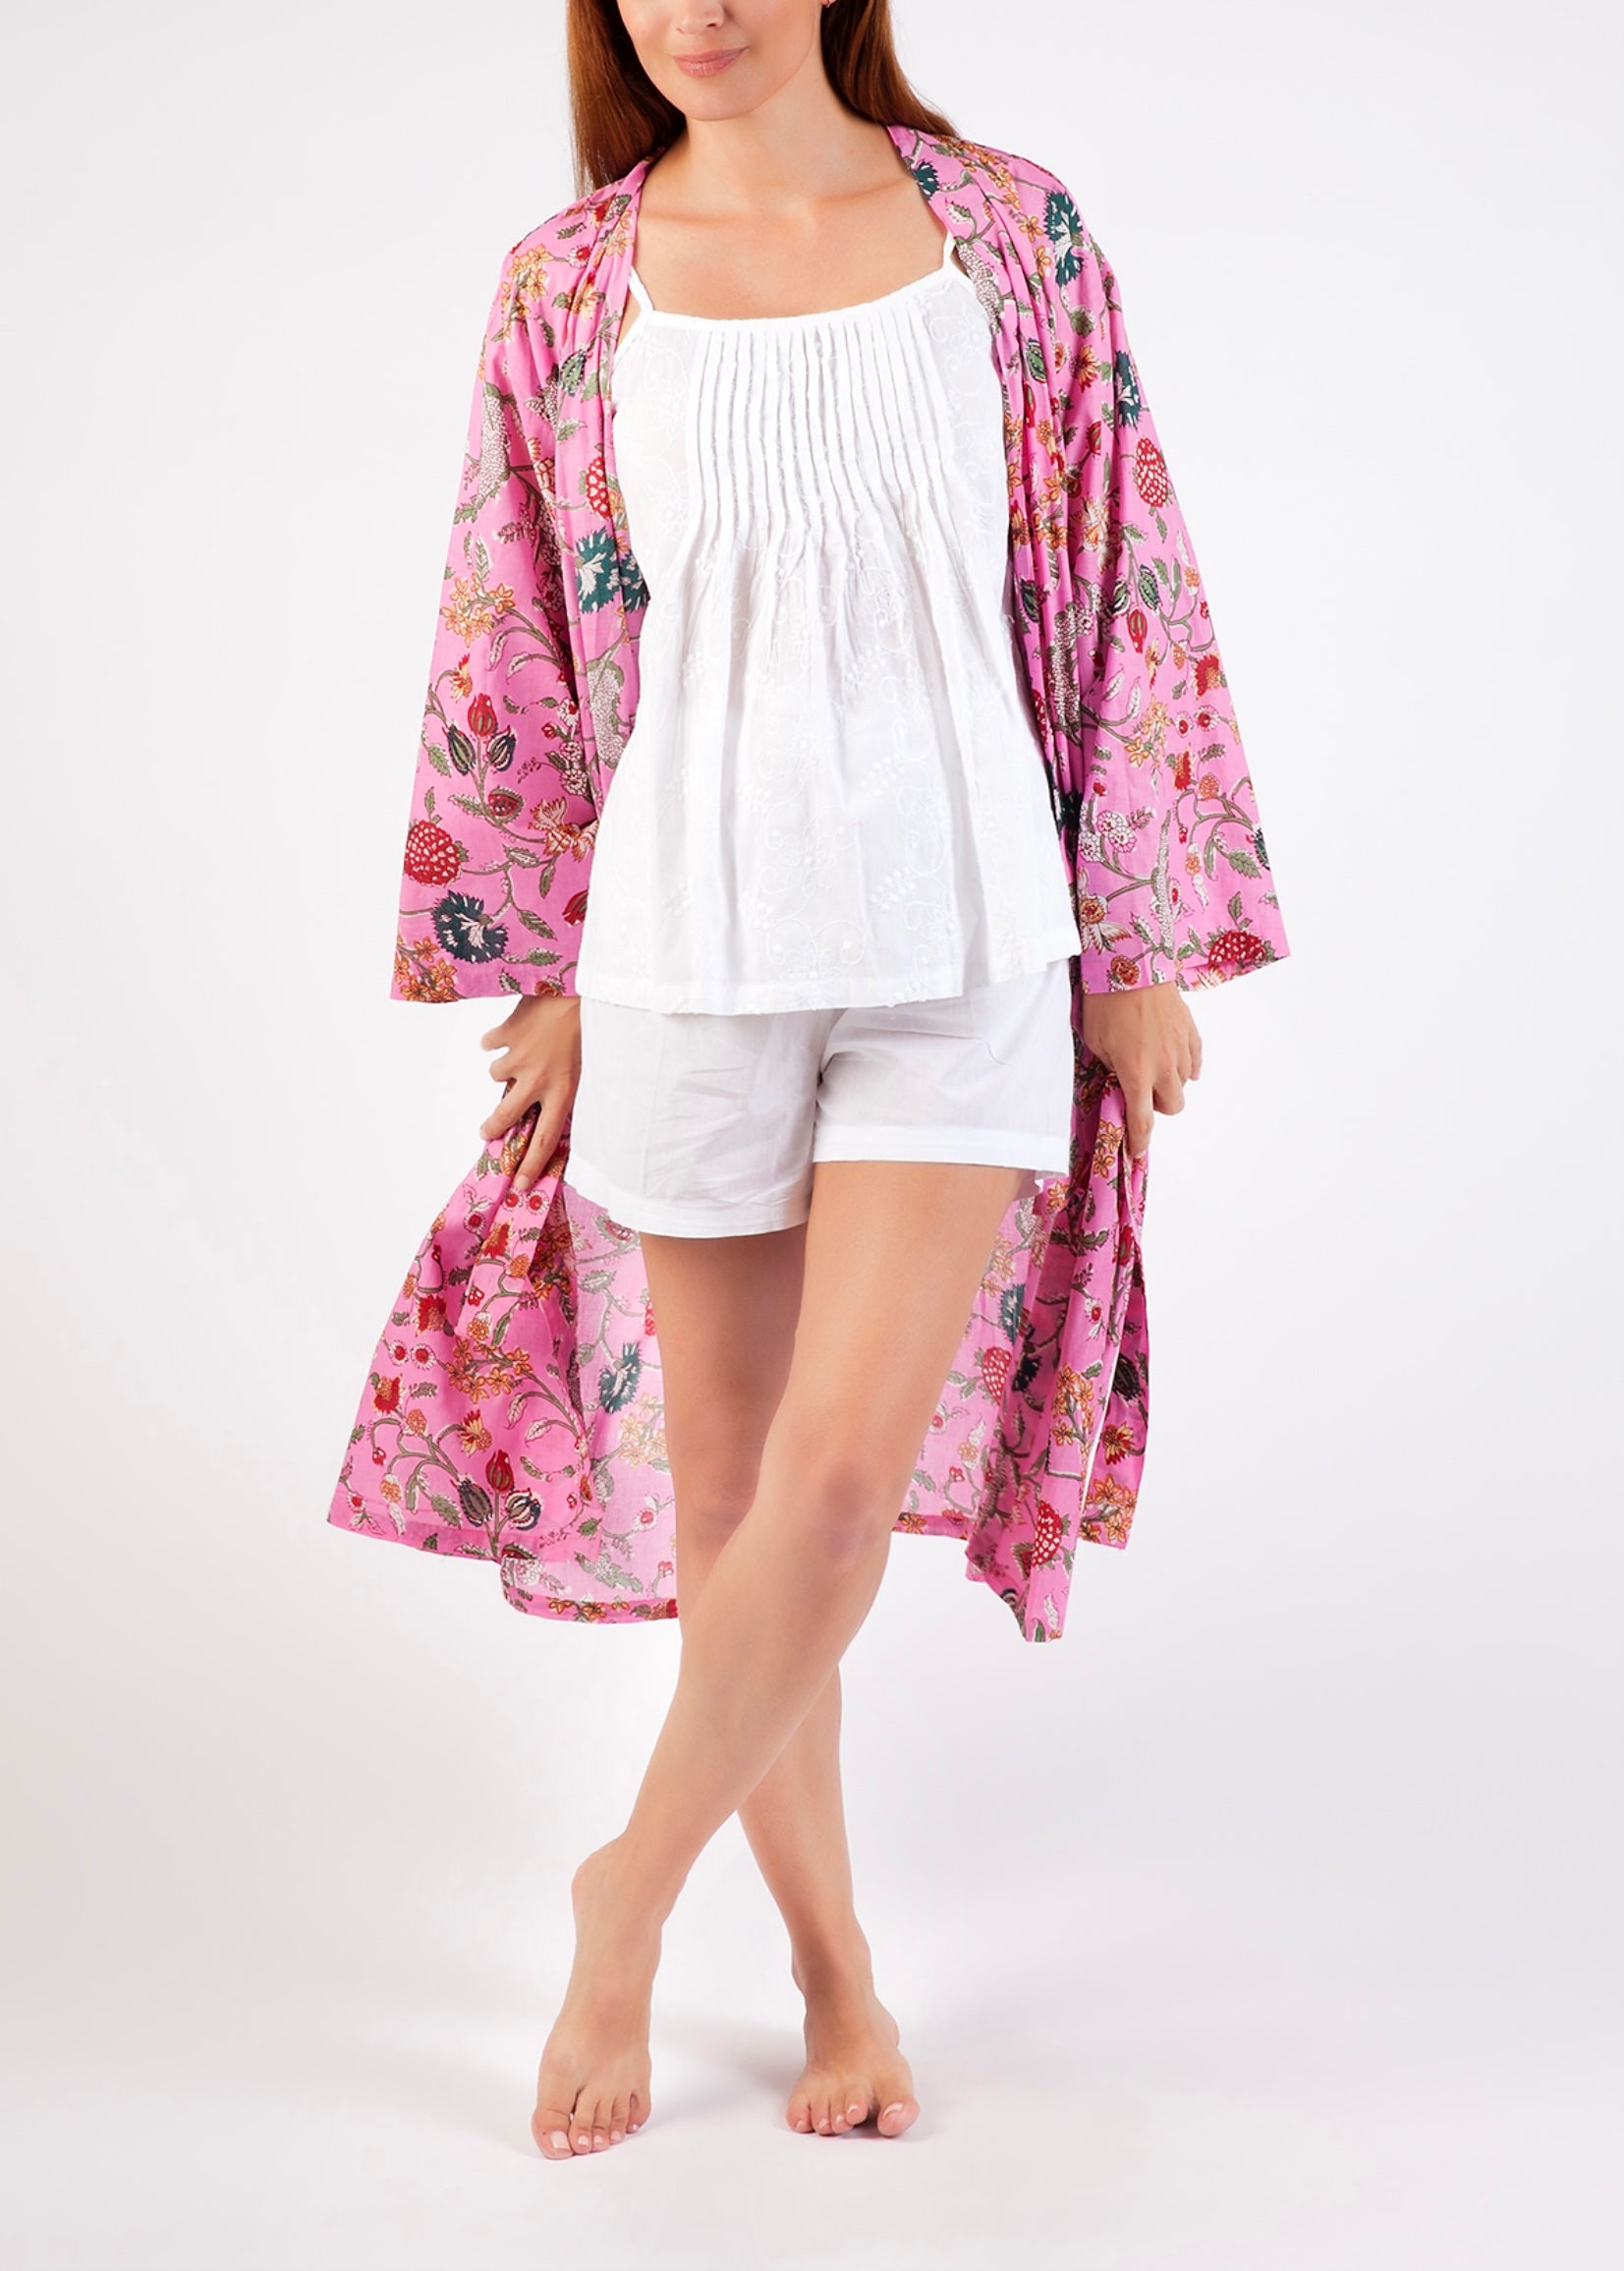 Hand Block Printed Dressing Gown - Pink Floral